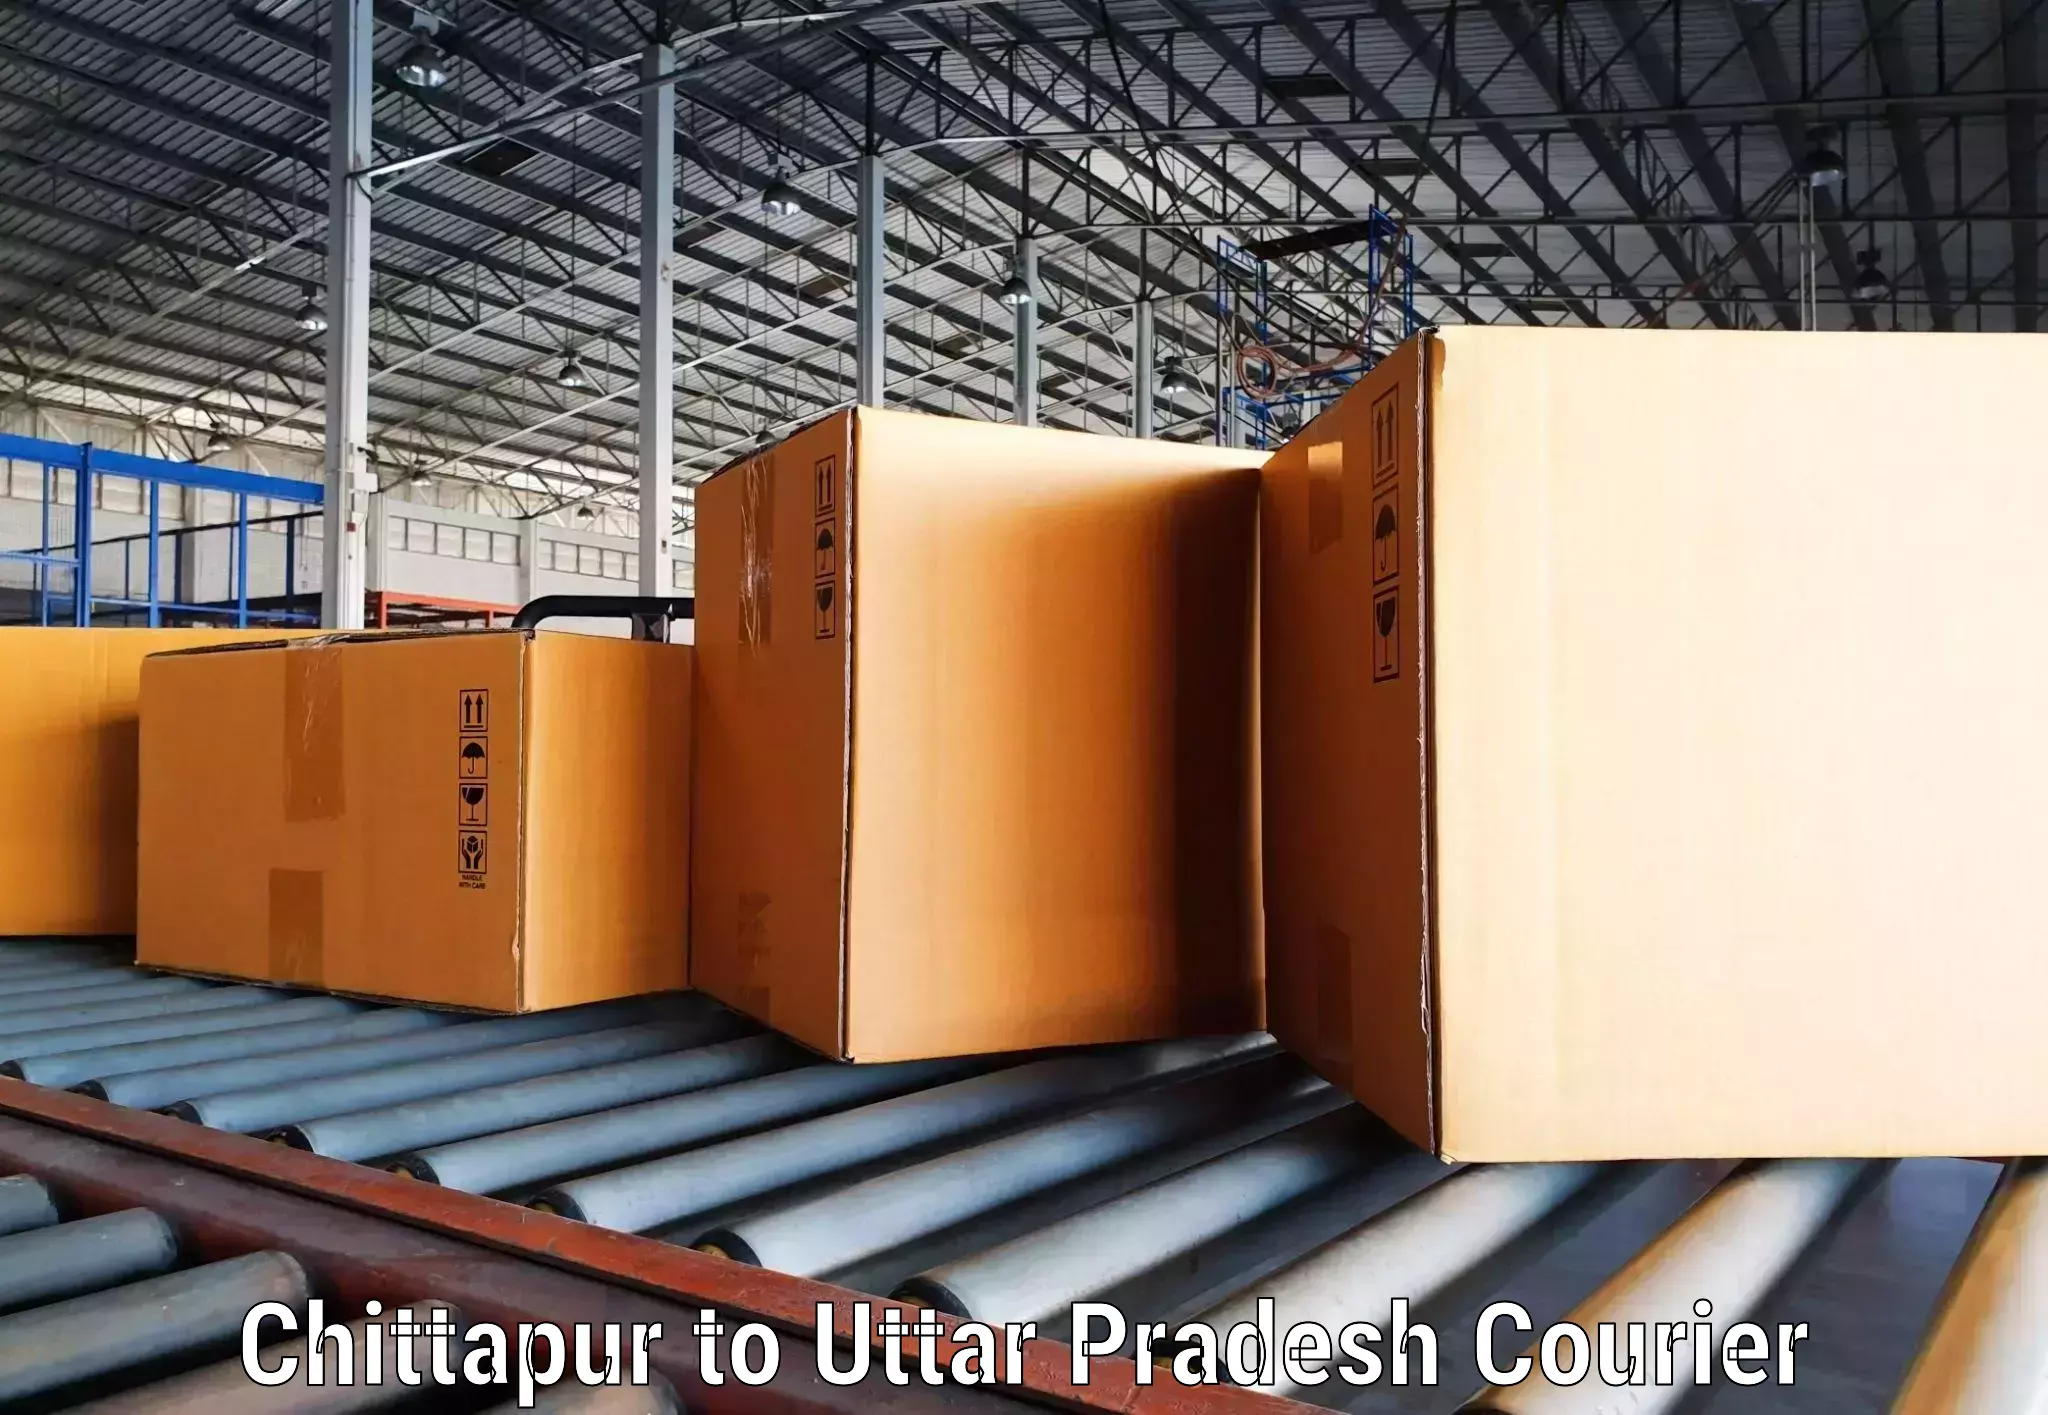 Innovative shipping solutions Chittapur to Dhaurahara